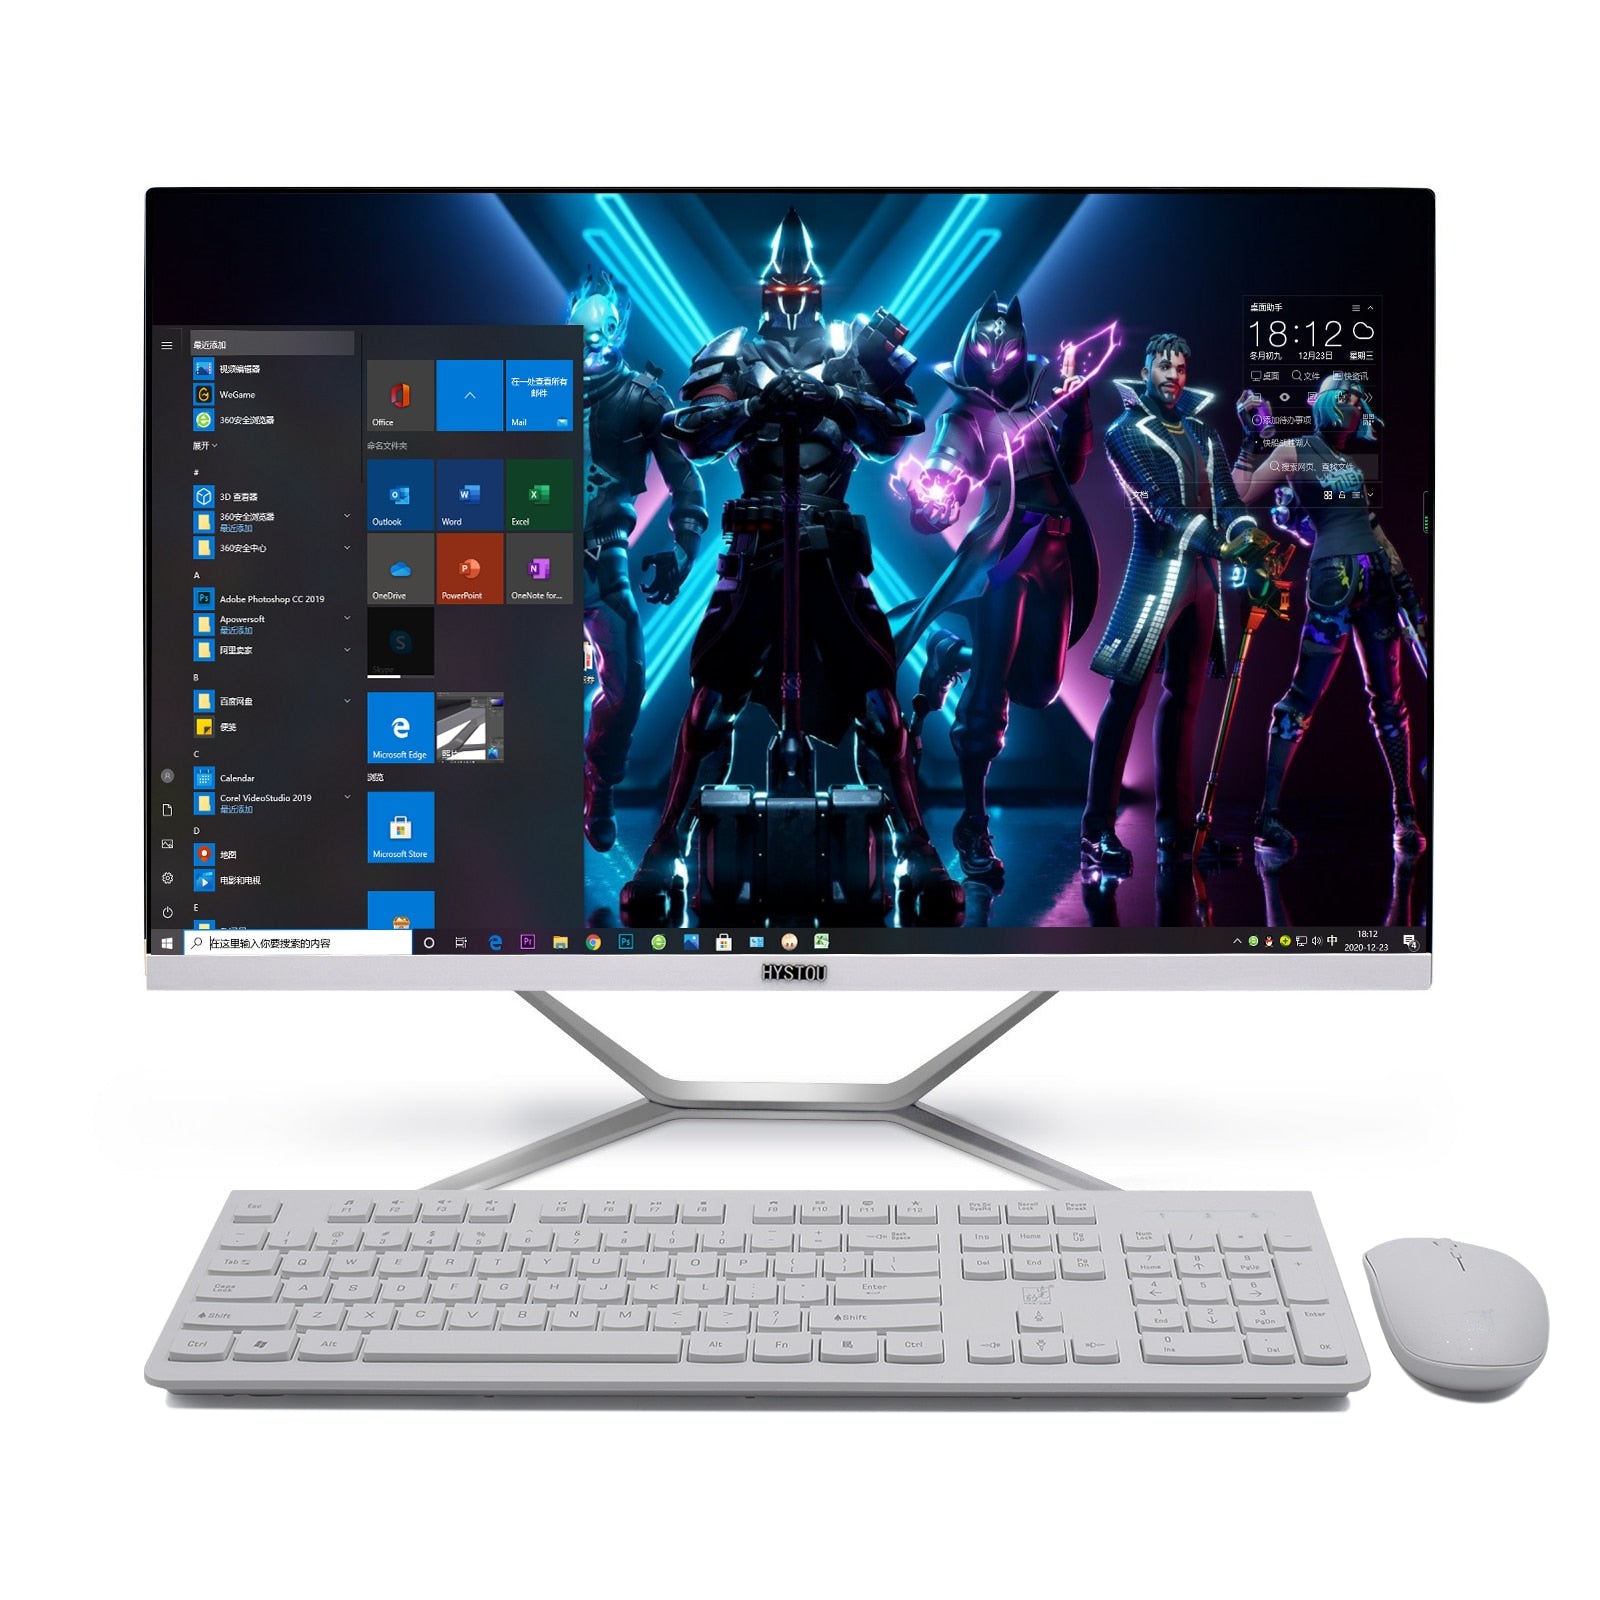 High Quality Desktop Computer 27 Inch All in One Gaming PC intel i7 8 core with Geforce NVIDIA GTX1650 GDDR5 Gamer using